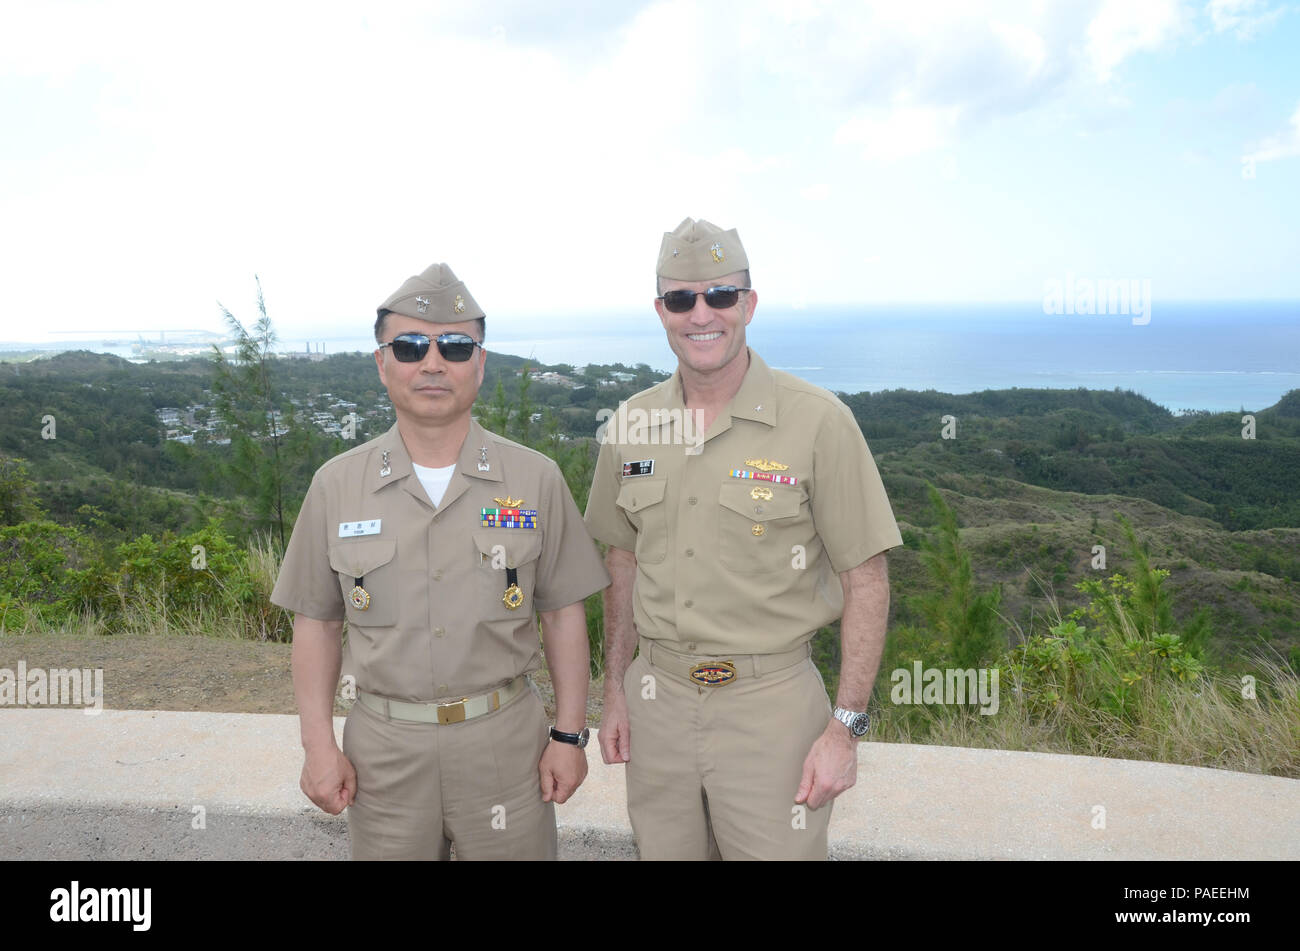 160331-N-YM720-234 SANTA RITA, Guam (March 31, 2016) Rear Adm. Youn Jeong Sang, commander, Submarine Force, Republic of Korea Navy (ROKN), left, and Rear Adm. William Merz, commander, Submarine Group 7 post at Asan Bay Overlook on Nimitz Hill after the first day of the 43rd Submarine Warfare Committee Meeting (SWCM). SWCM is a bilateral discussion between the U.S. and ROKN submarine forces designed to foster the partnership and focuses on submarine tactics, force integraton and future submarine development. (U.S. Navy photo by MC3 Allen McNair/Released) Stock Photo